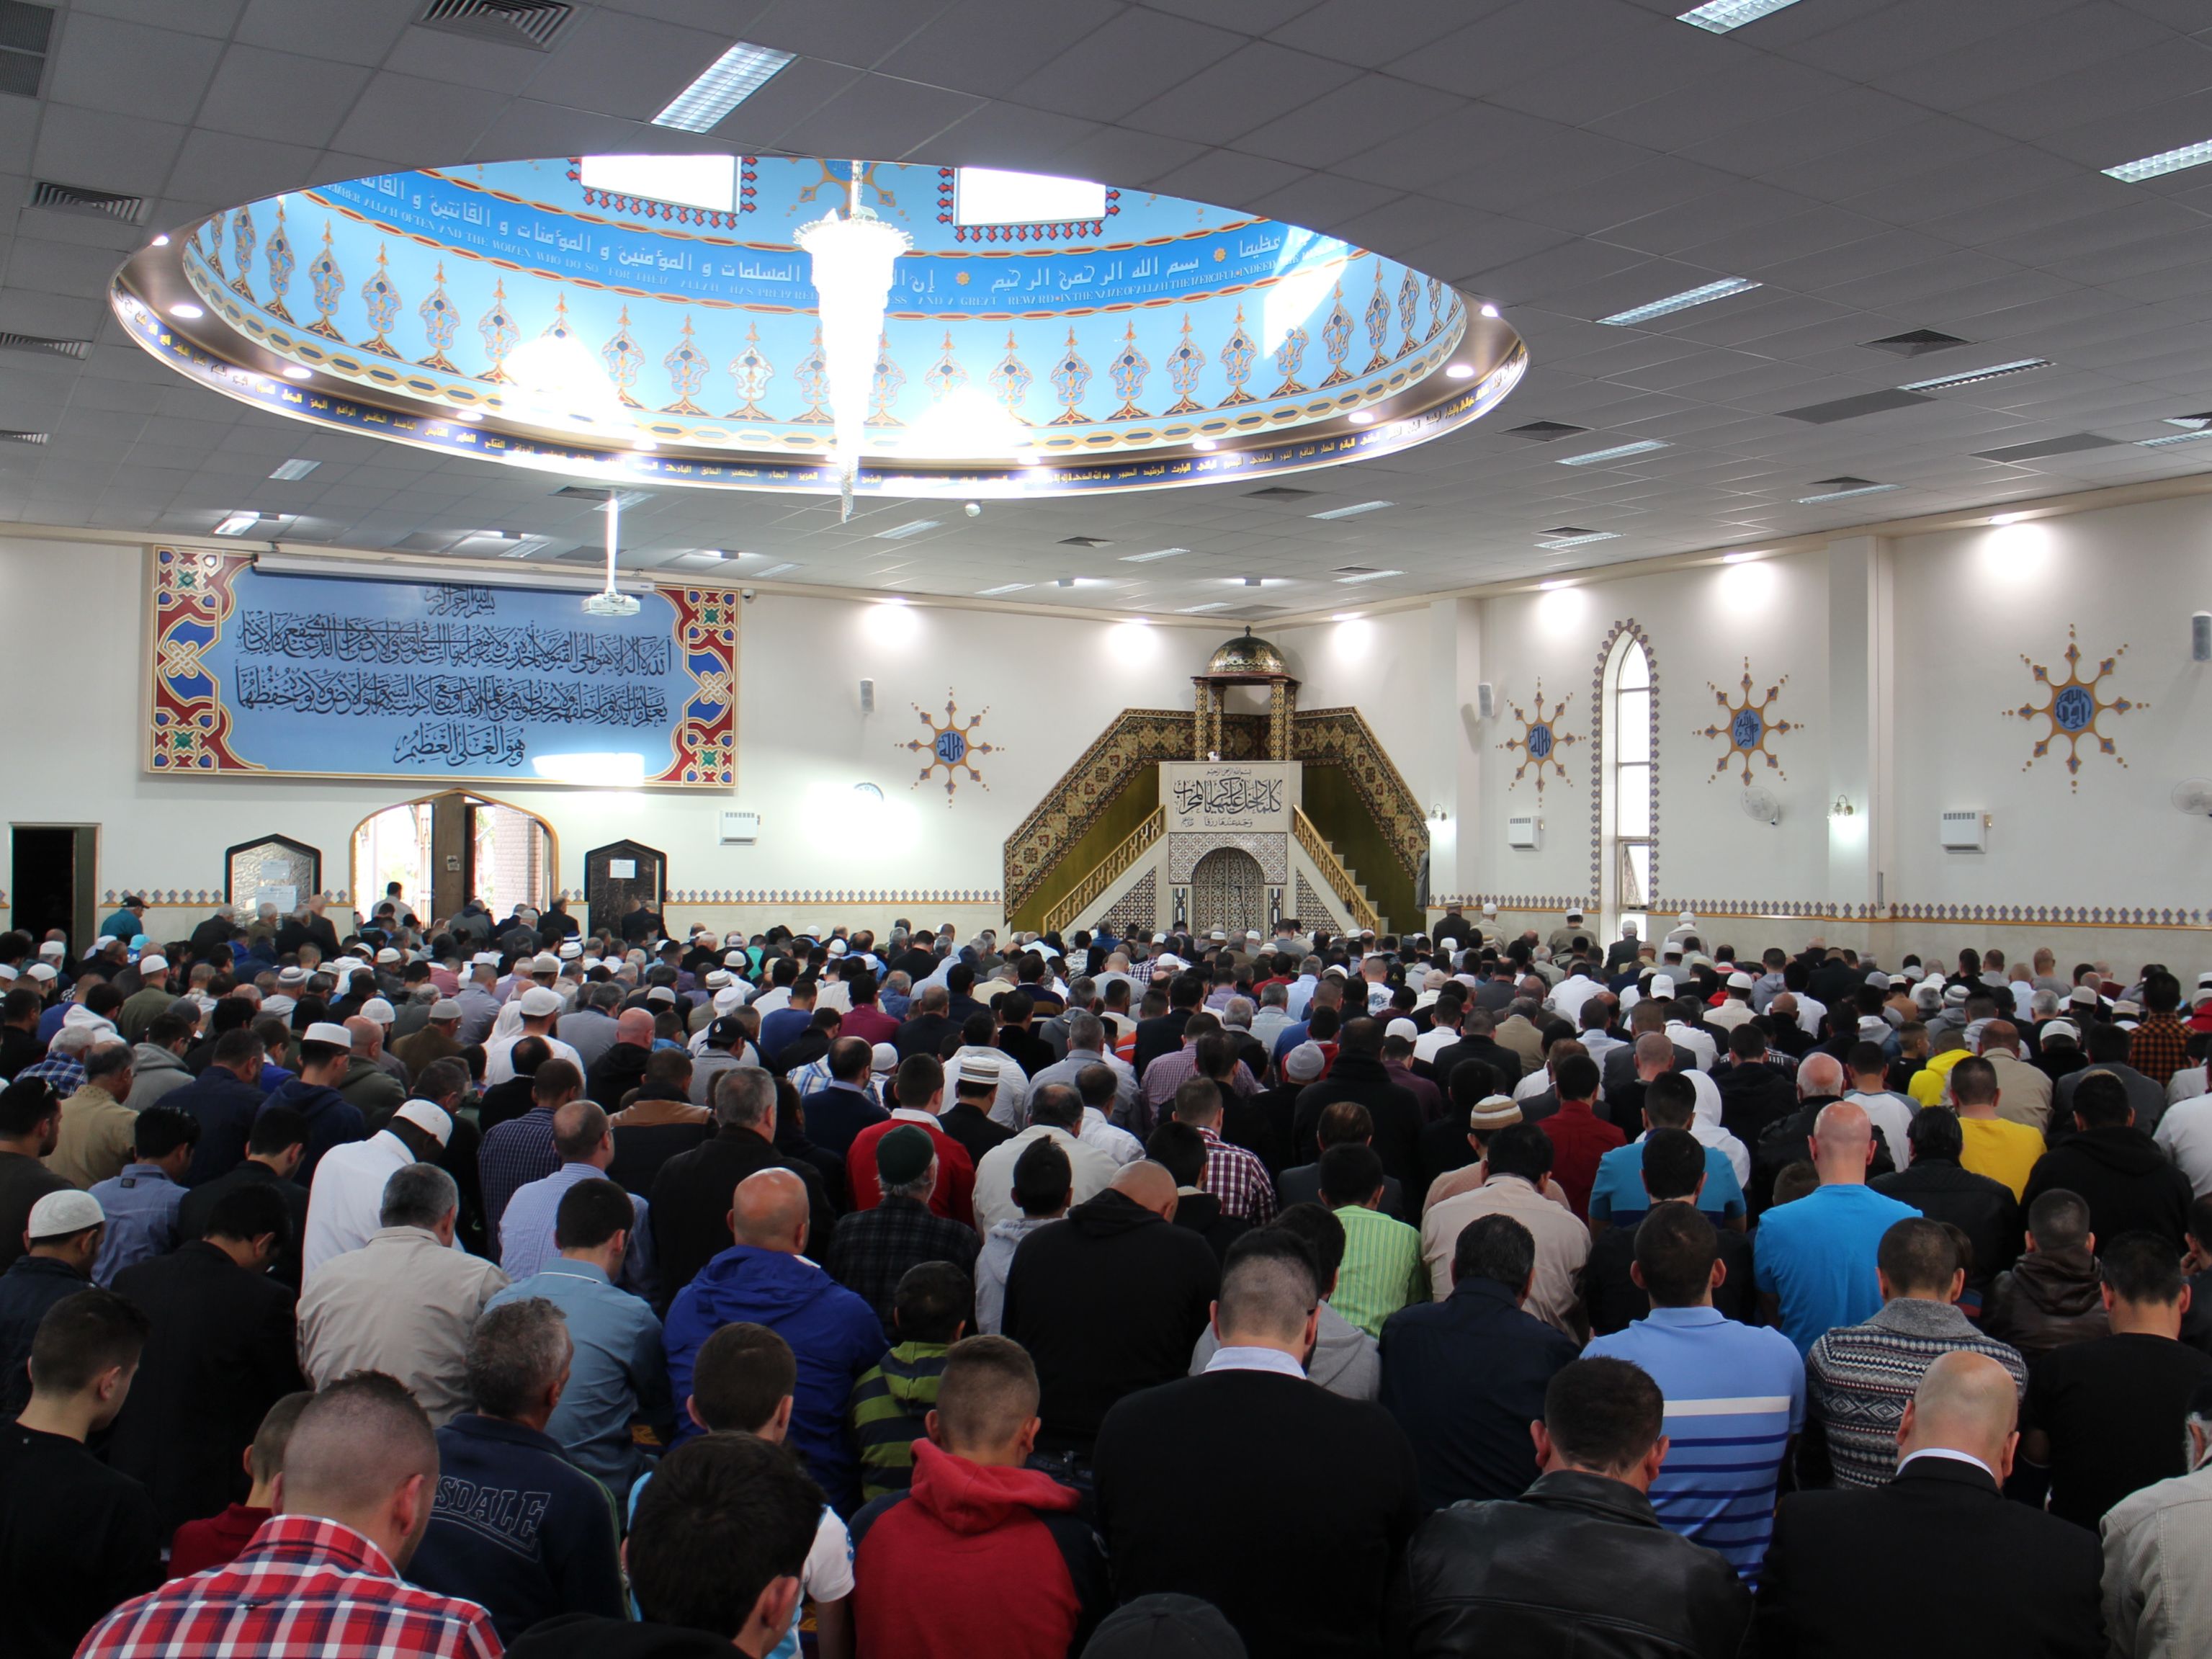 Eid prayer at Lakemba Mosque, reported to be Australia's largest mosque, which regularly hosts around 40,000 people.